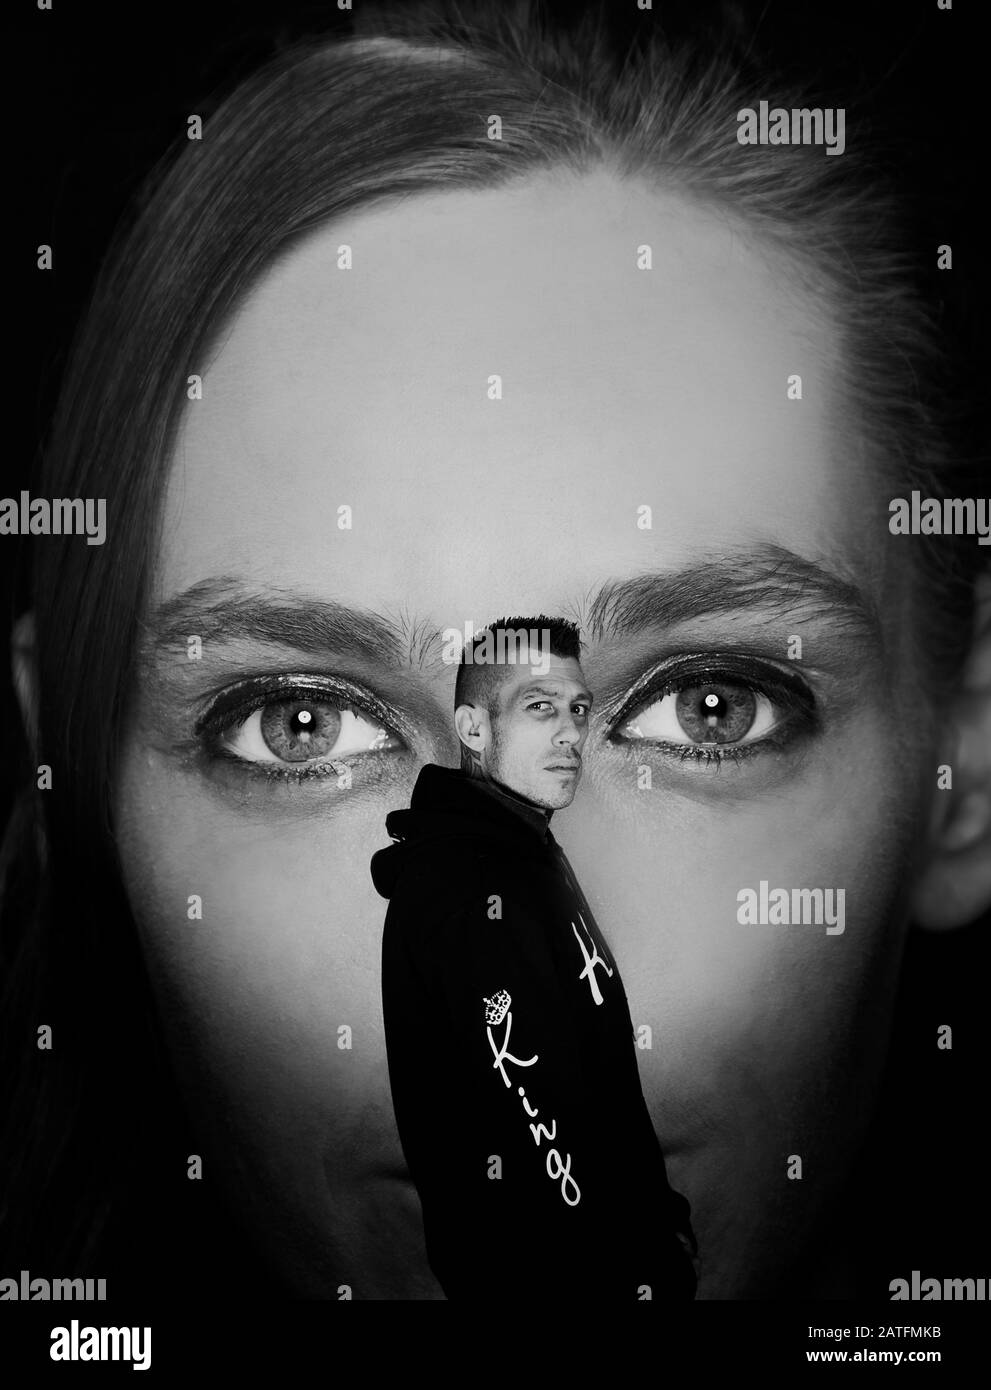 A composite black and white image of a girls face with man superimposed Stock Photo